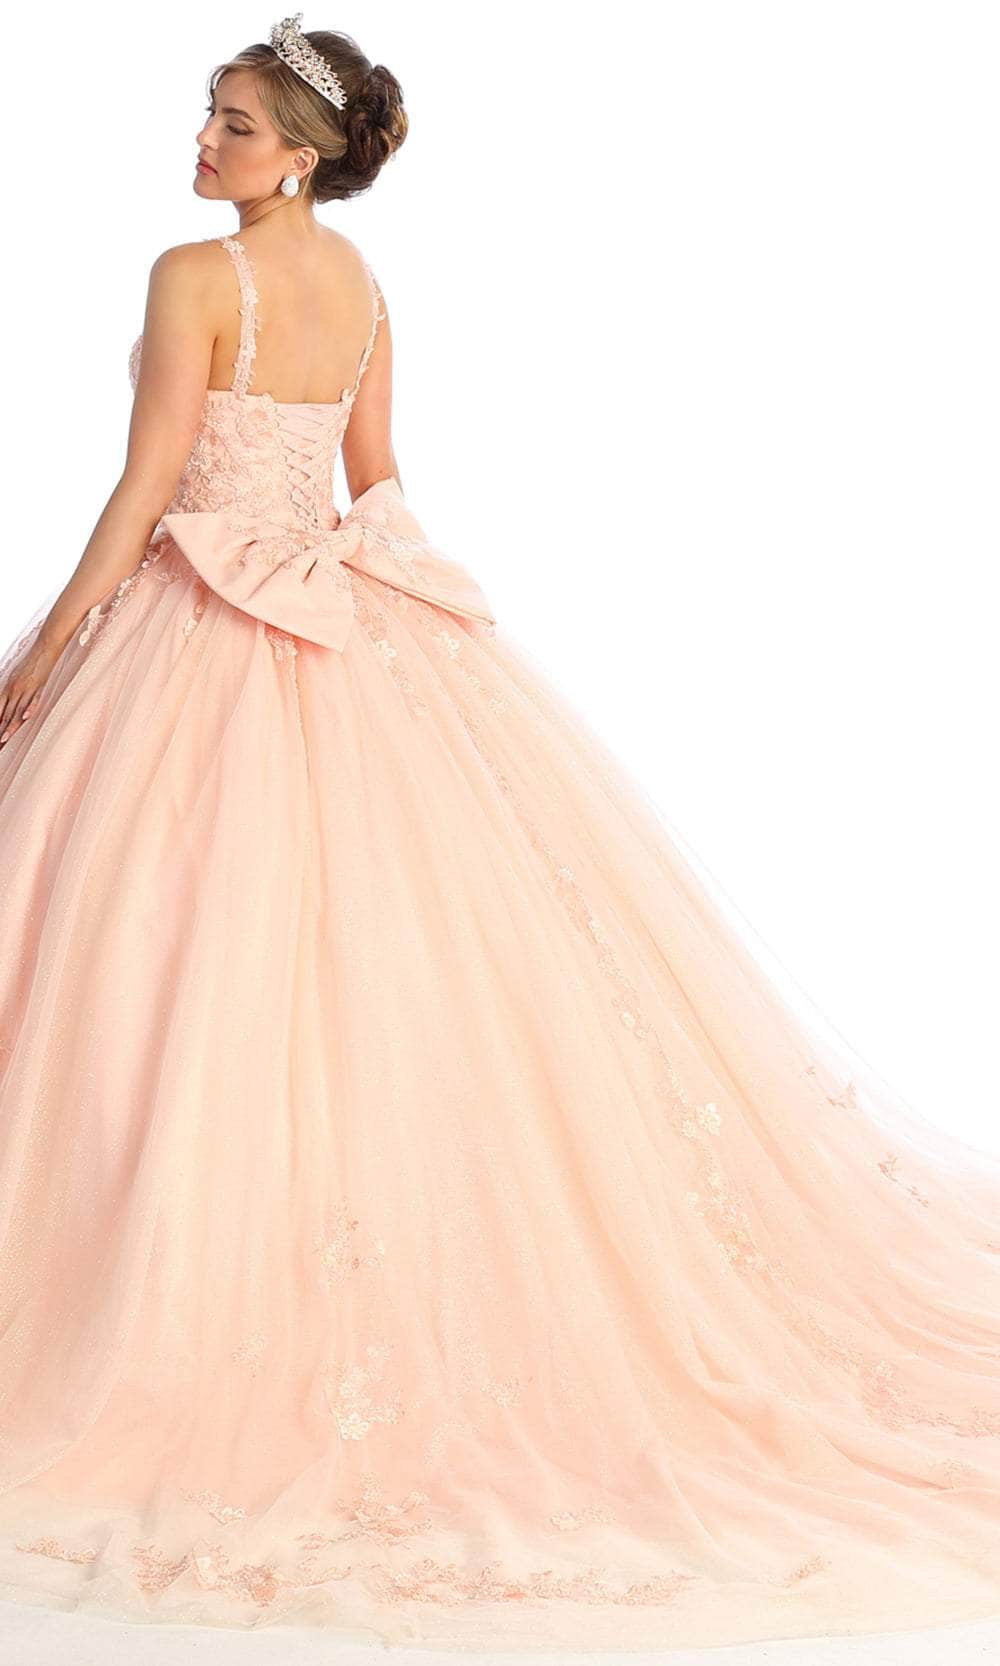 May Queen LK174 - V-Neck Embroidered Prom Ballgown Ball Gowns